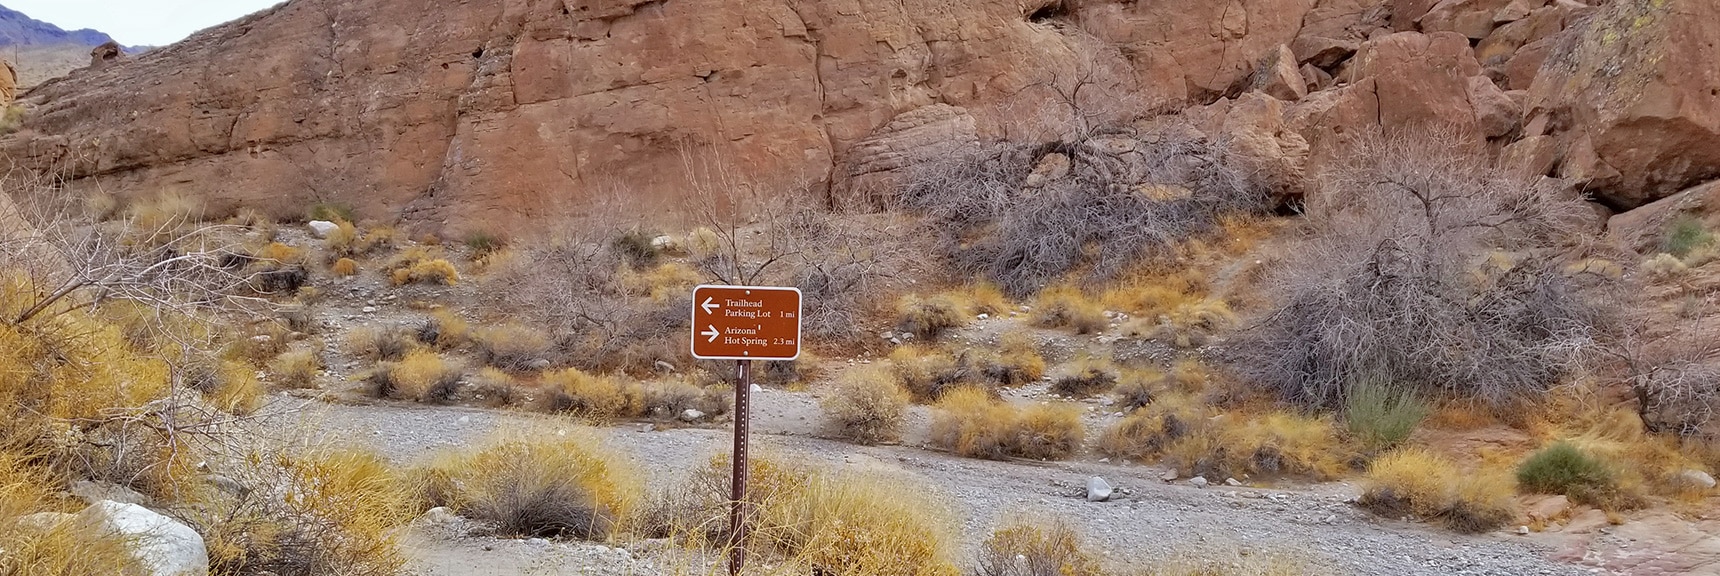 Back at White Rock Canyon/Liberty Bell Intersection. Turn Right Down Canyon. | Arizona Hot Spring | Liberty Bell Arch | Lake Mead National Recreation Area, Arizona